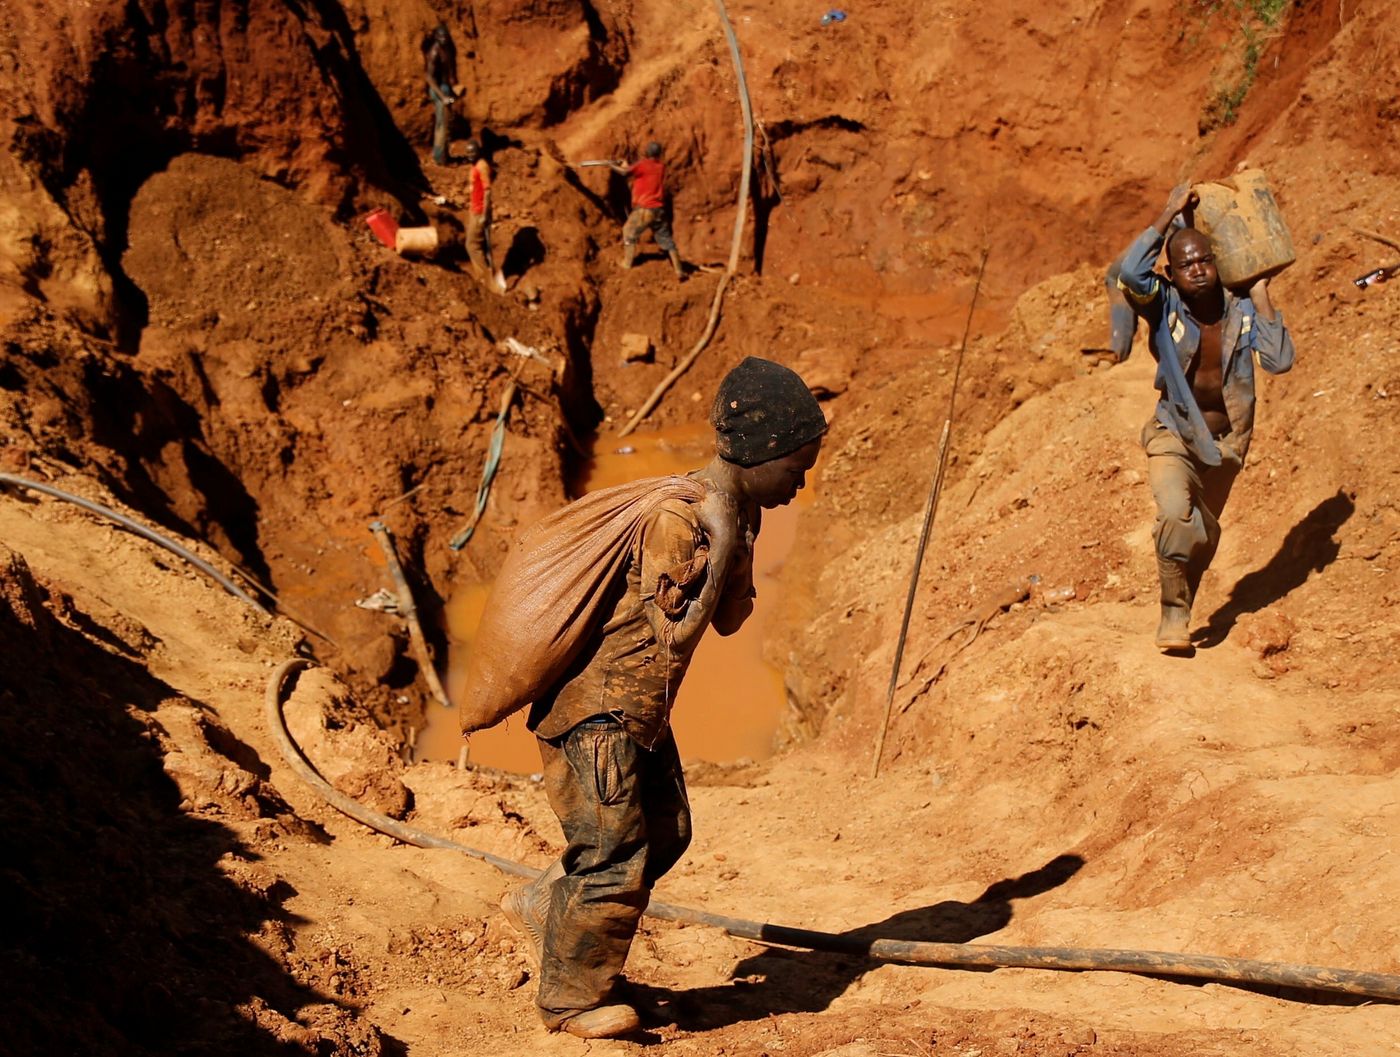 2018: Illegal artisanal gold miners work at an open mine in Mazowe, Zimbabwe.